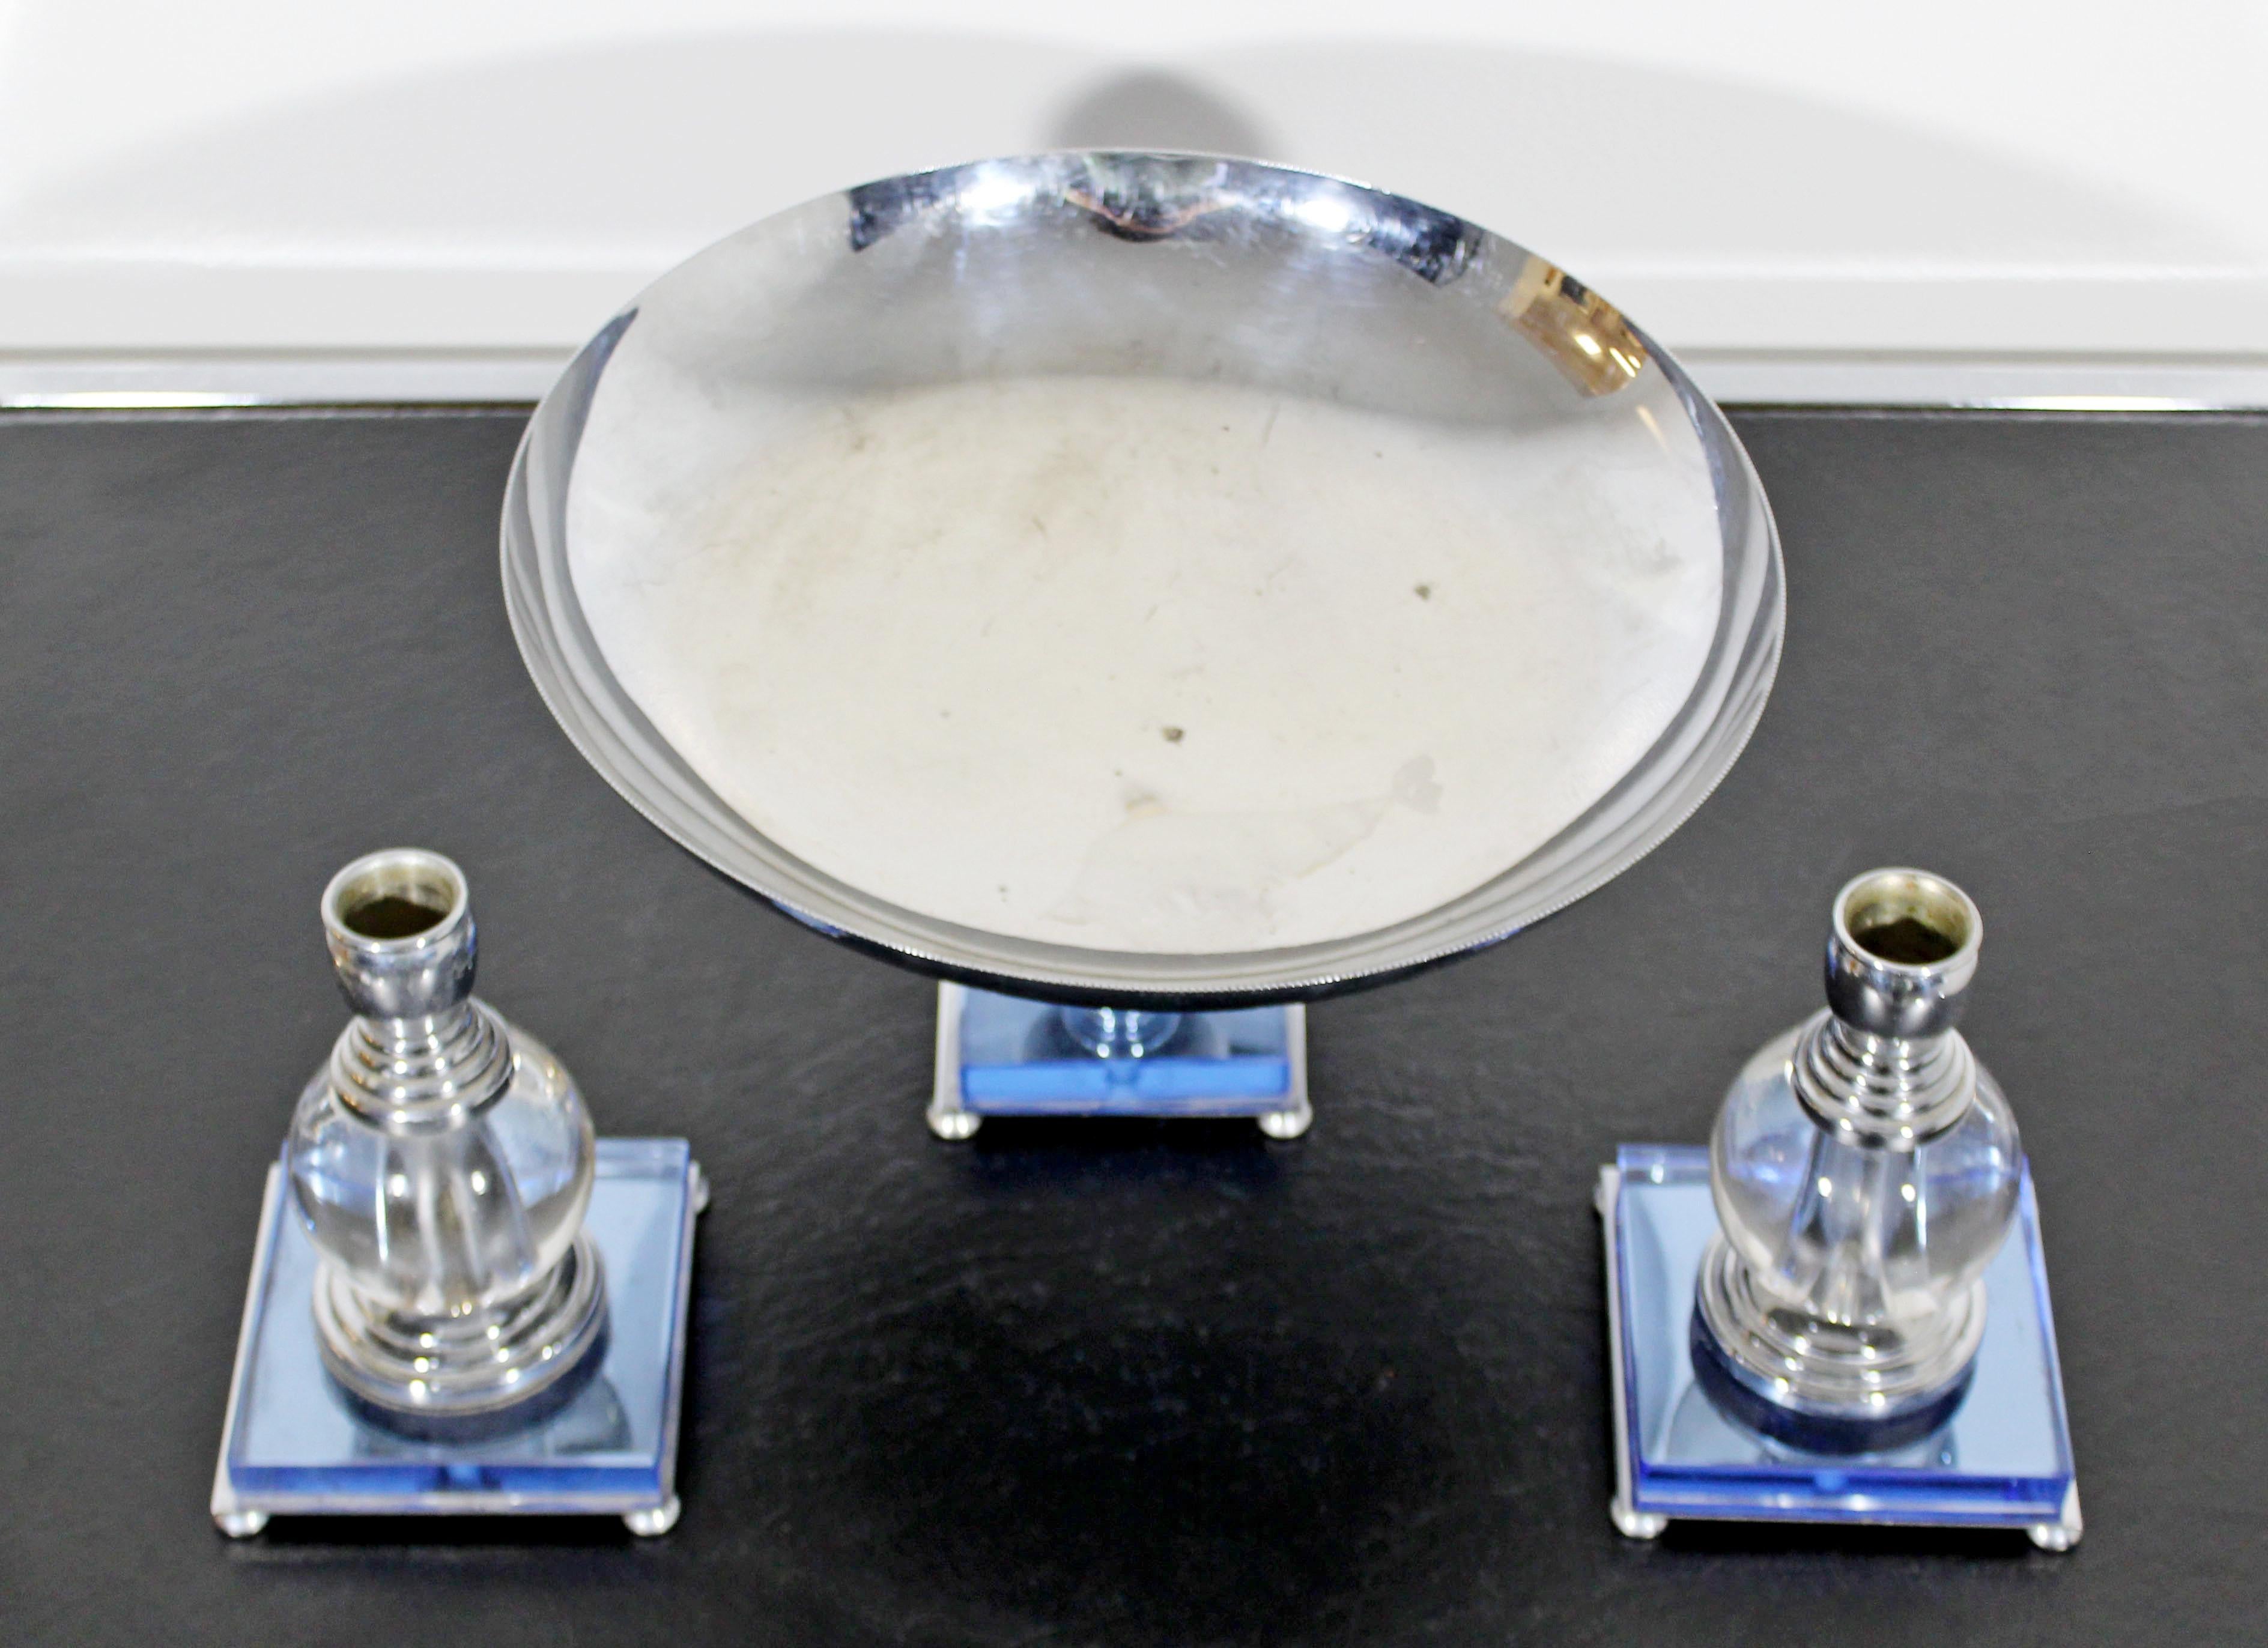 American Art Deco Pair Mautner Farber Chromium-Plated Candleholders and Serving Dish Blue